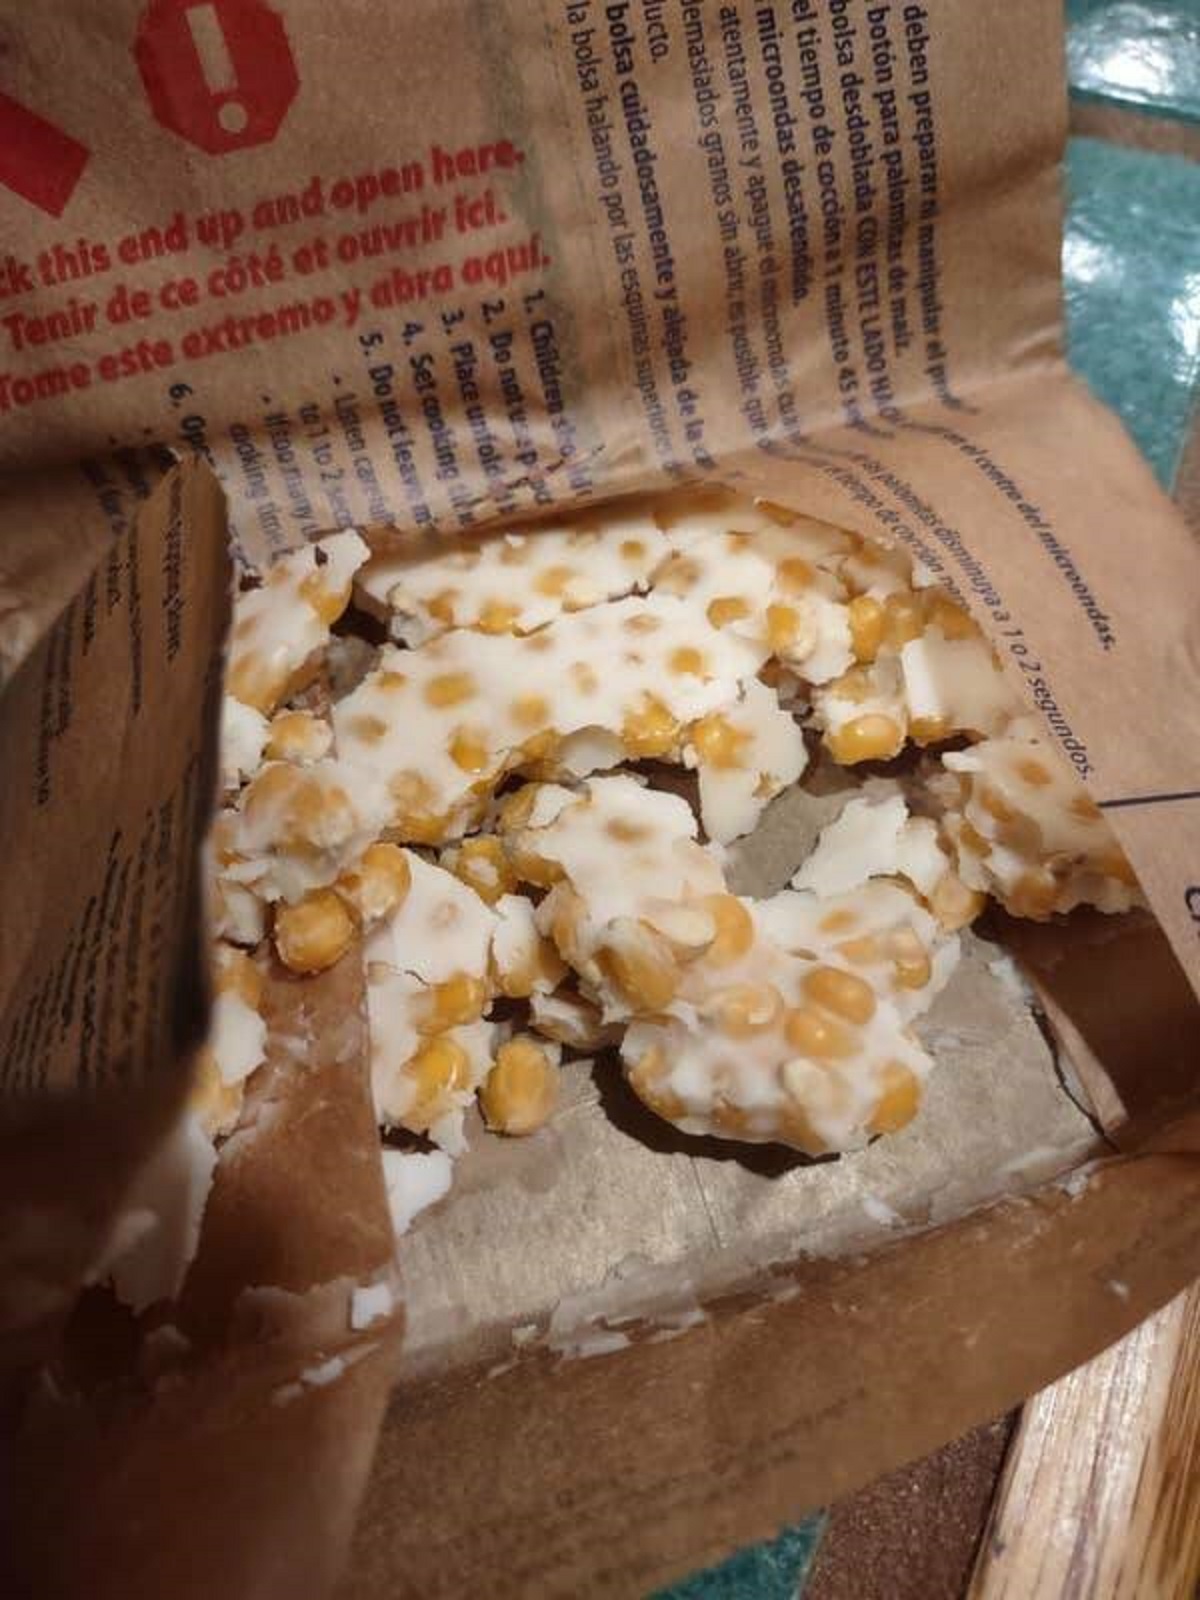 This is what's inside a bag of microwavable popcorn: